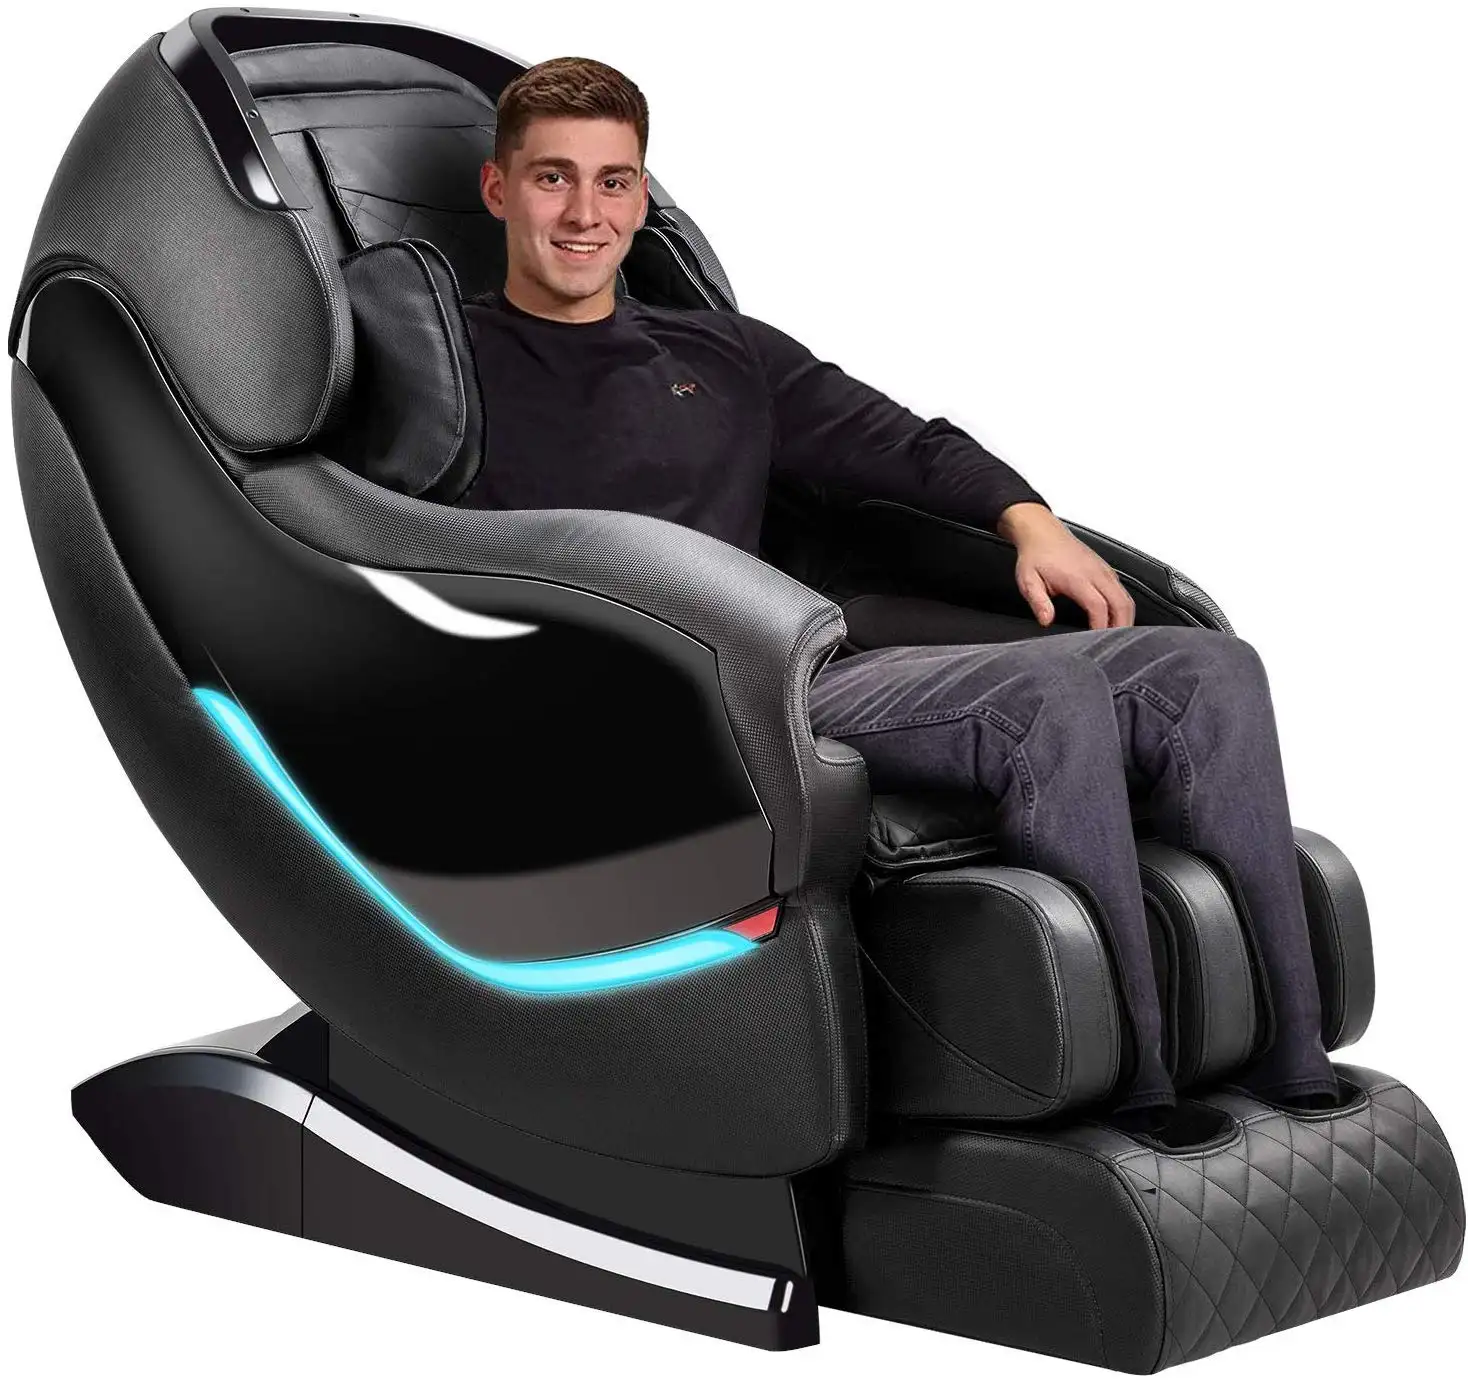 Dolphin Massage Chair China Trade